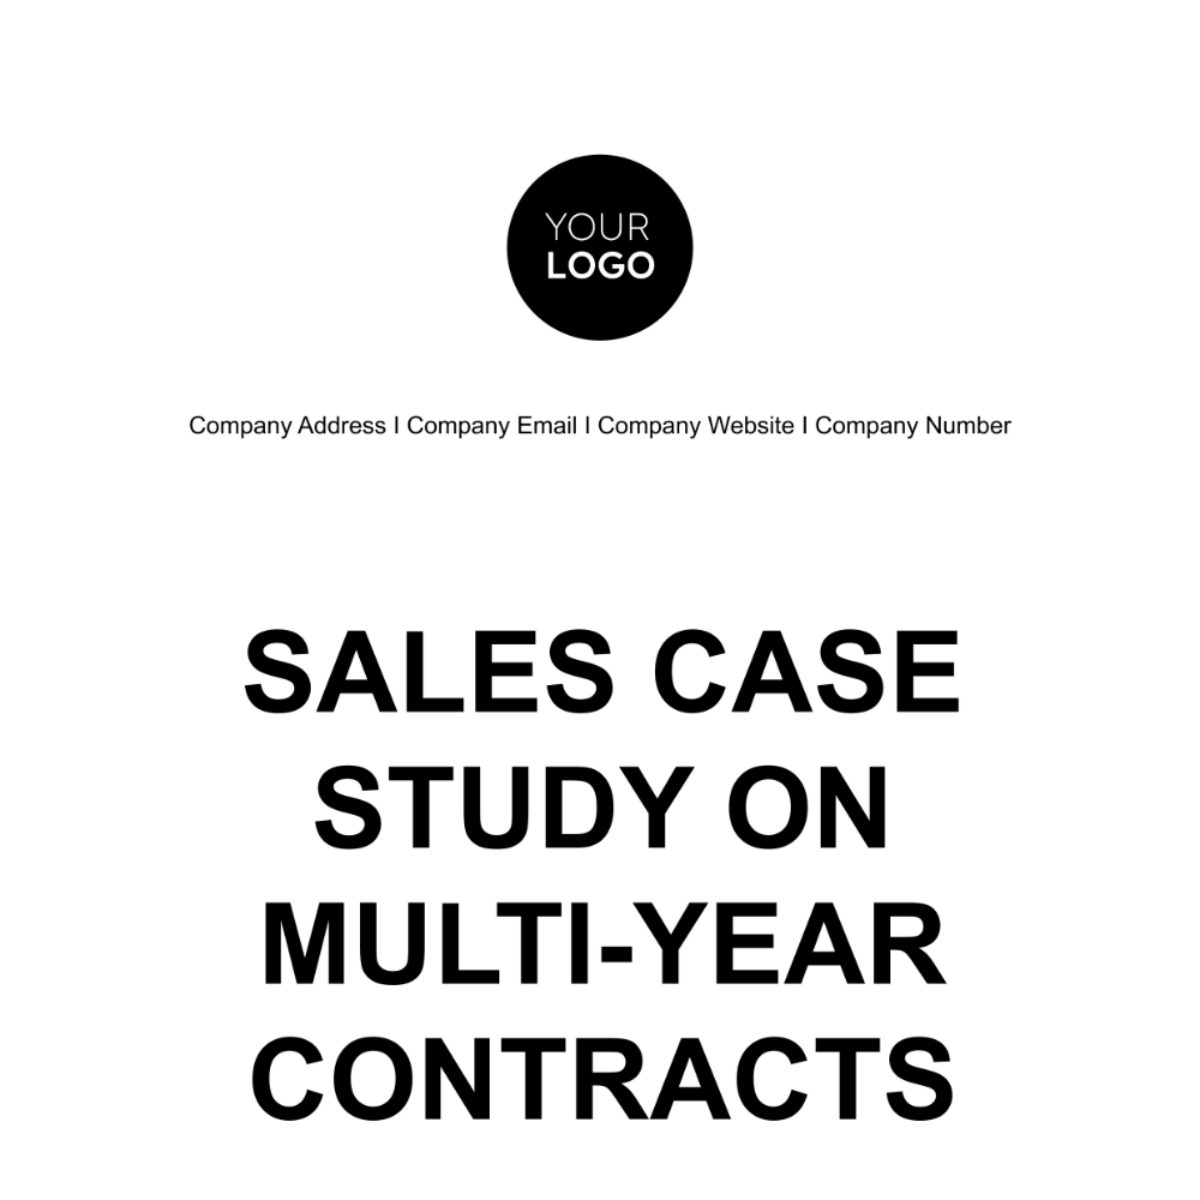 Sales Case Study on Multi-Year Contracts Template